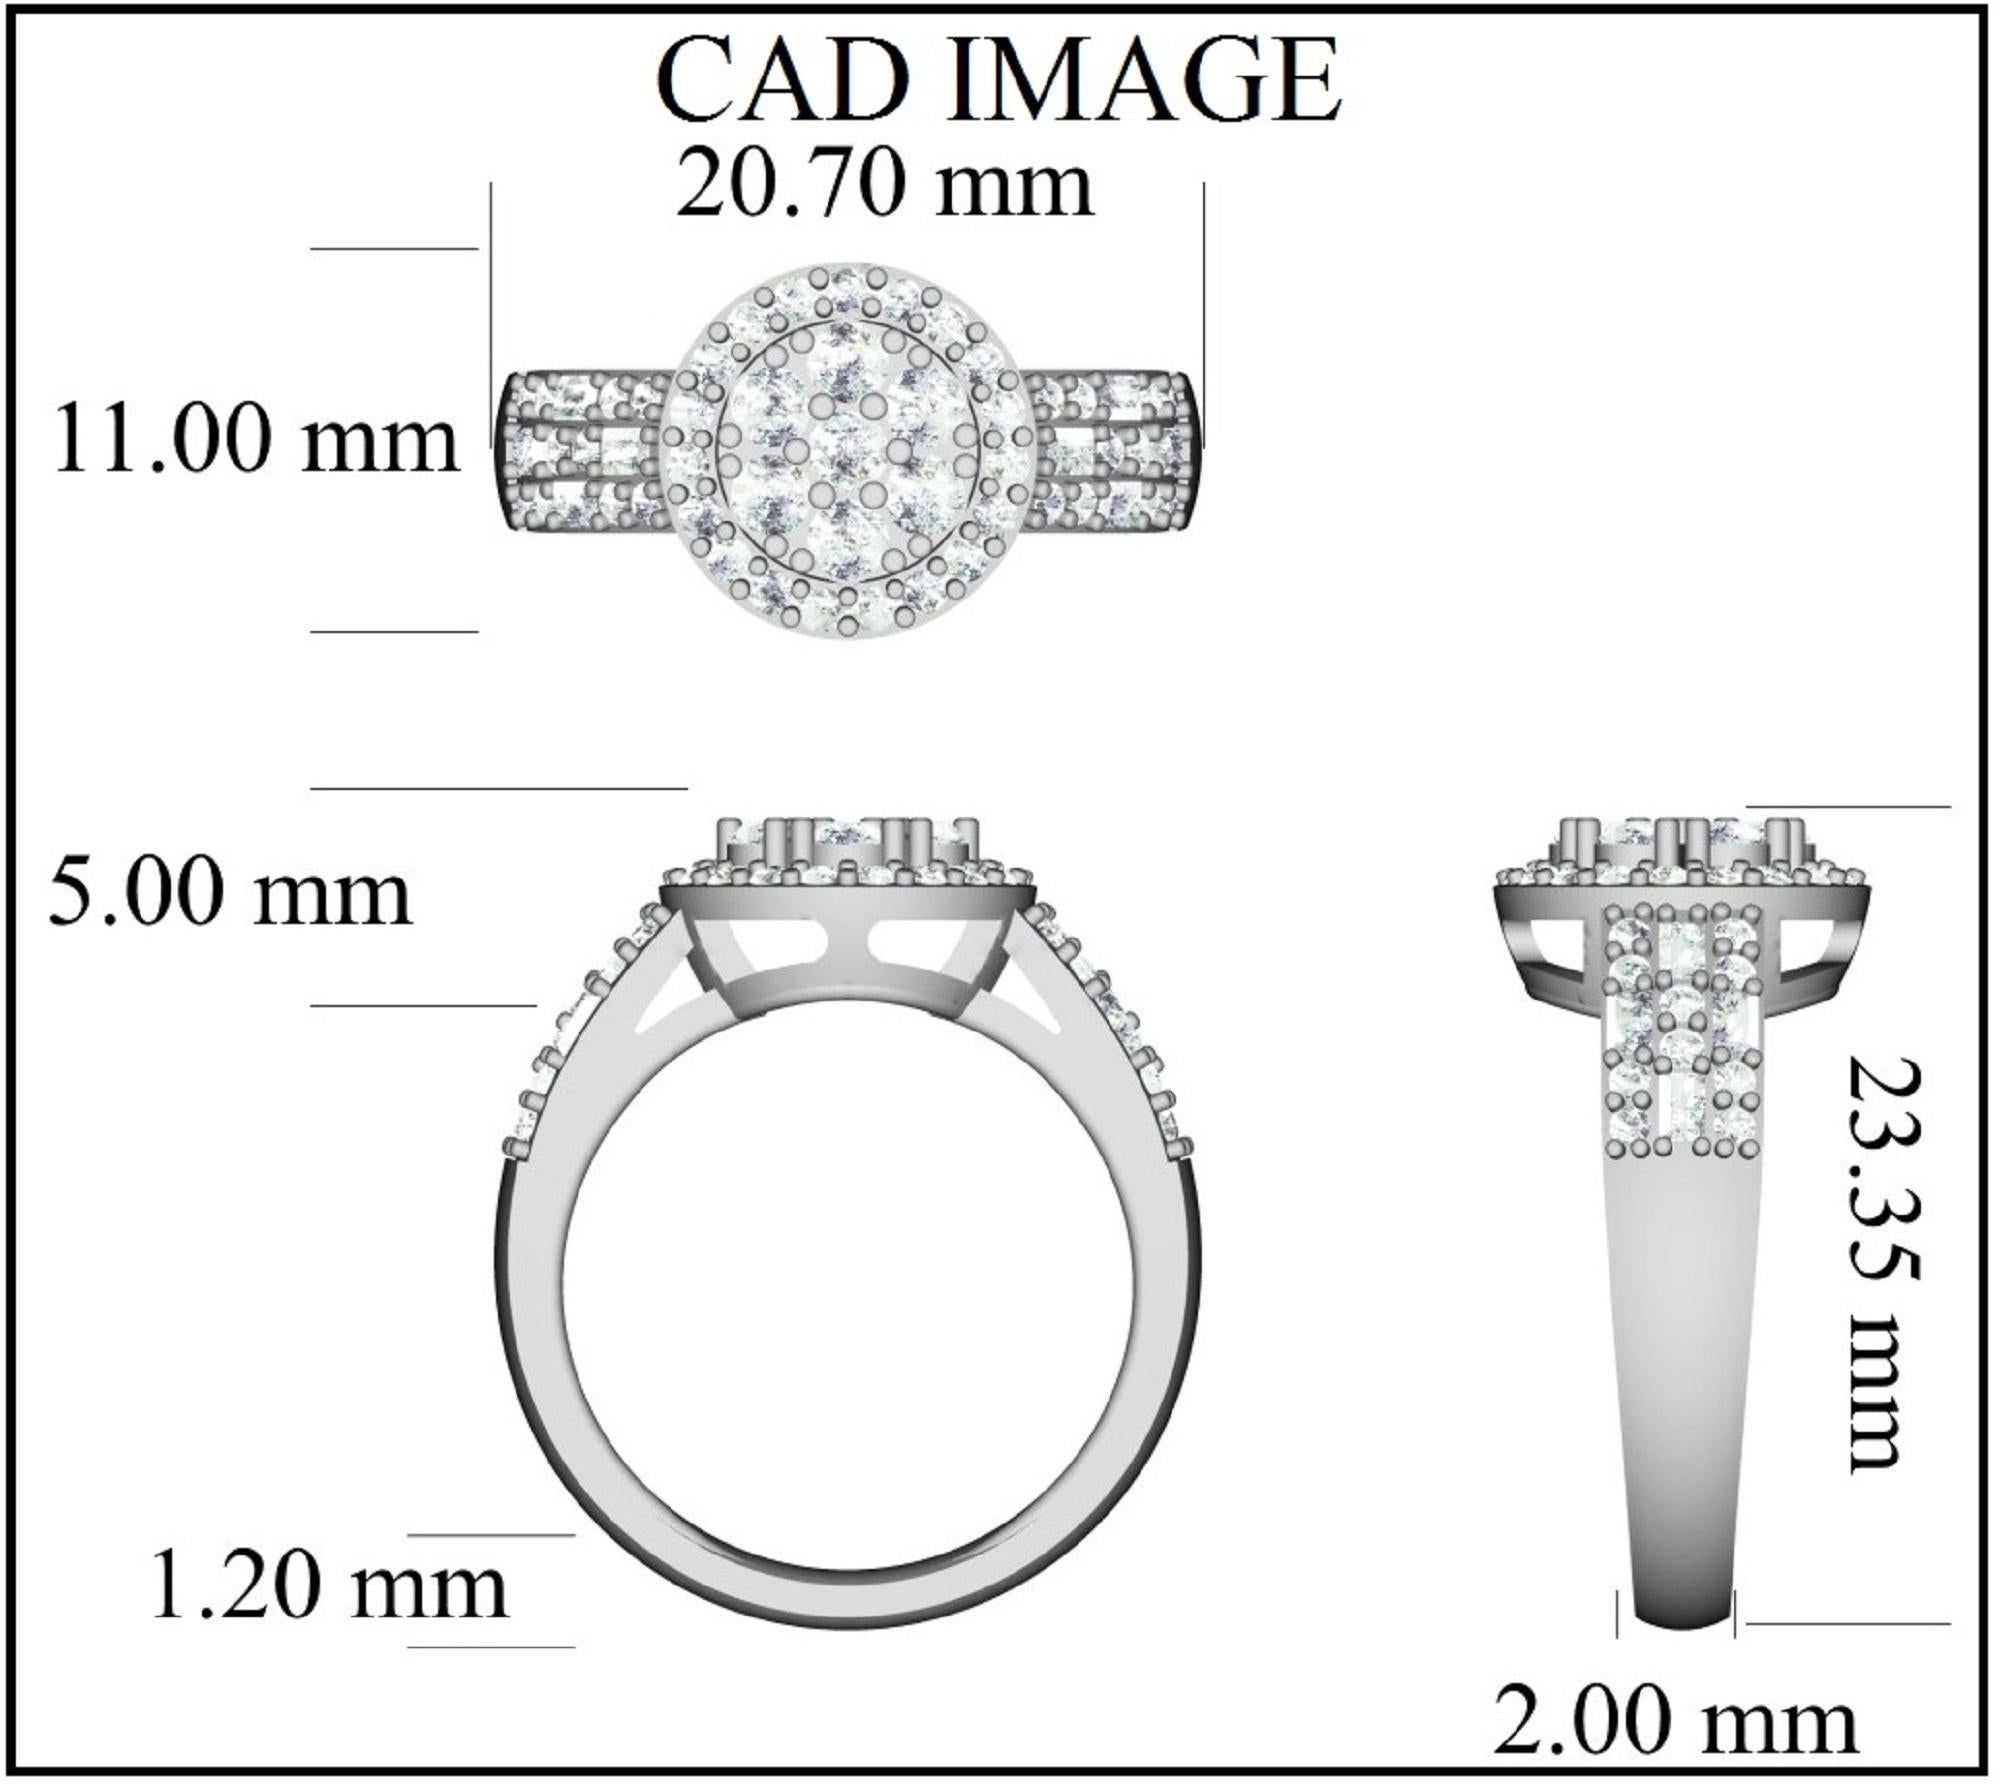 This Round Diamond Cluster Engagement Ring in 14K Solid White Gold showcases 1.0 carats of sparkling 46 round and 8 baguette-cut diamonds set in prong setting, H-I color I2 clarity. Featuring a fabulous cluster design and a highly polished gold